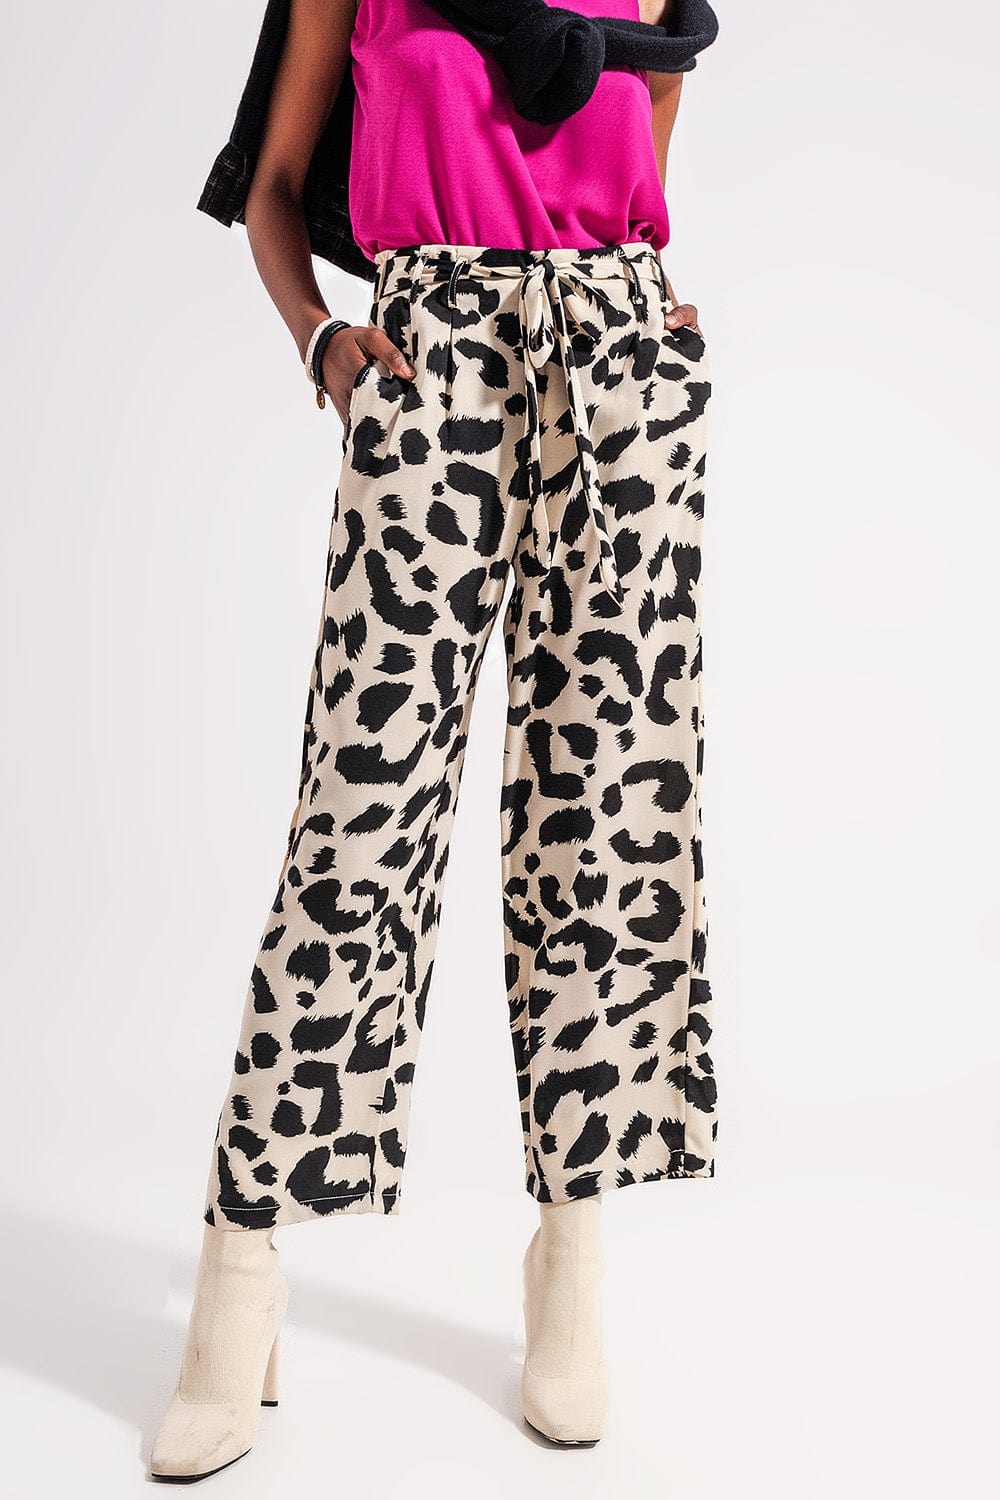 Q2 Pants Relaxed trousers in cream animal print